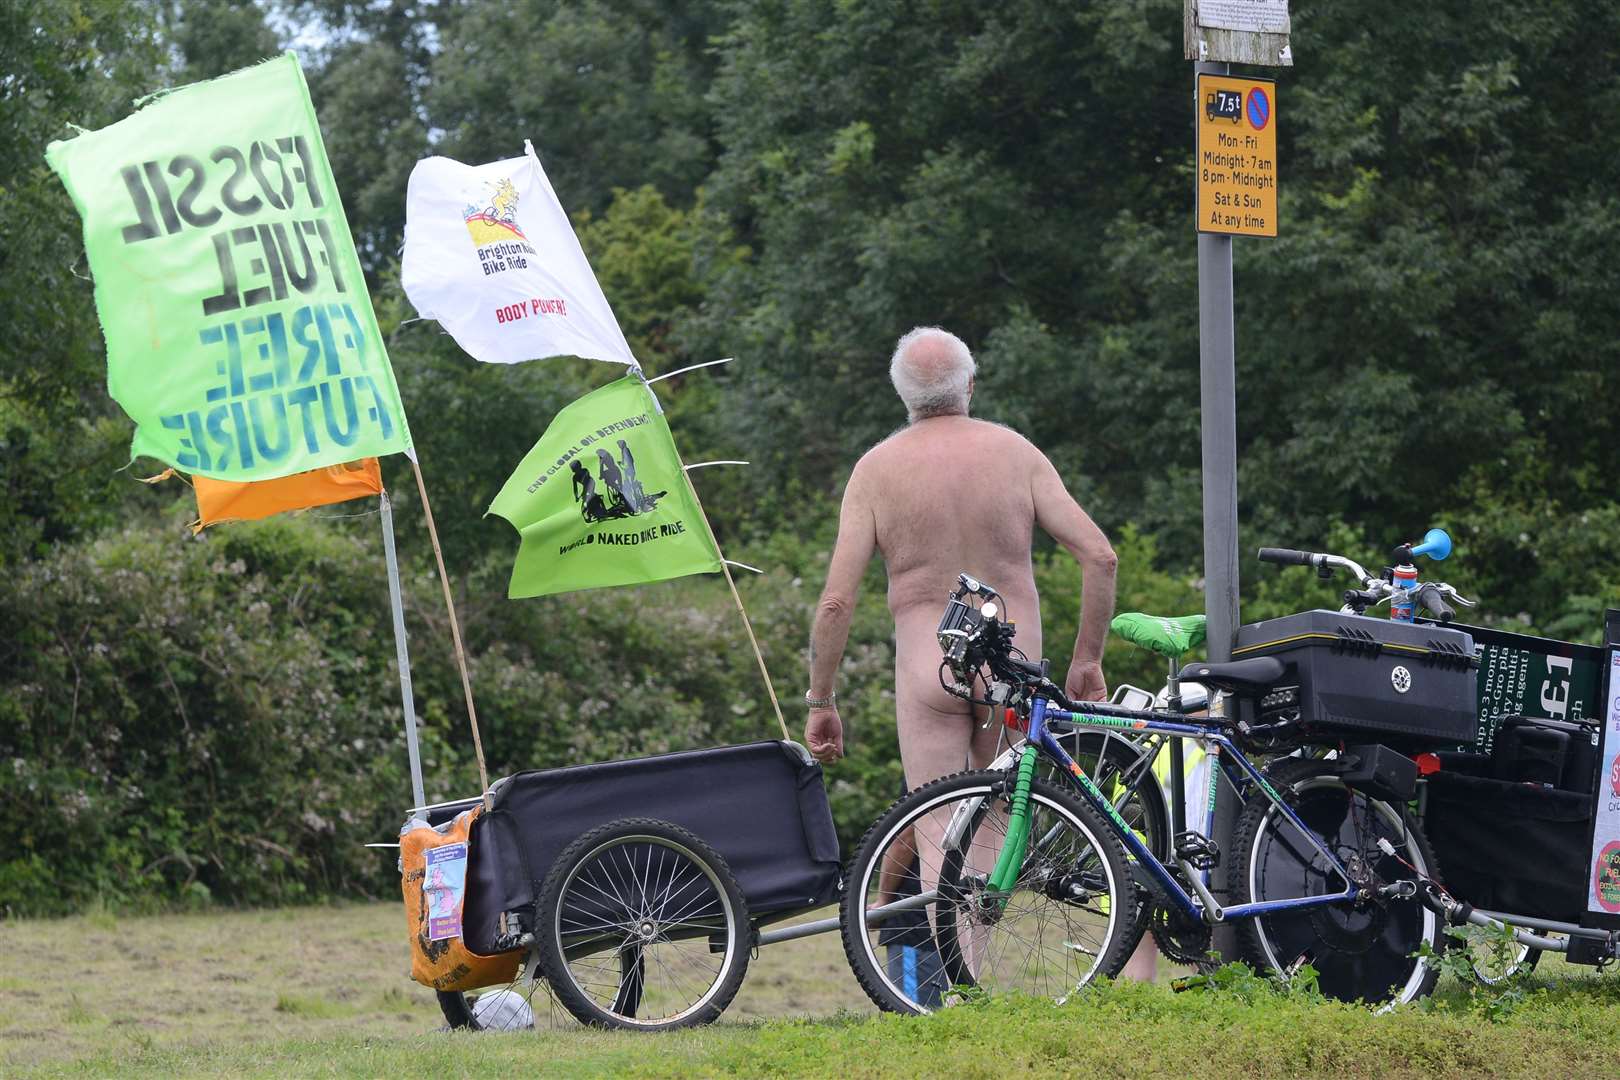 This year marks the seventh annual naked bike ride in the town